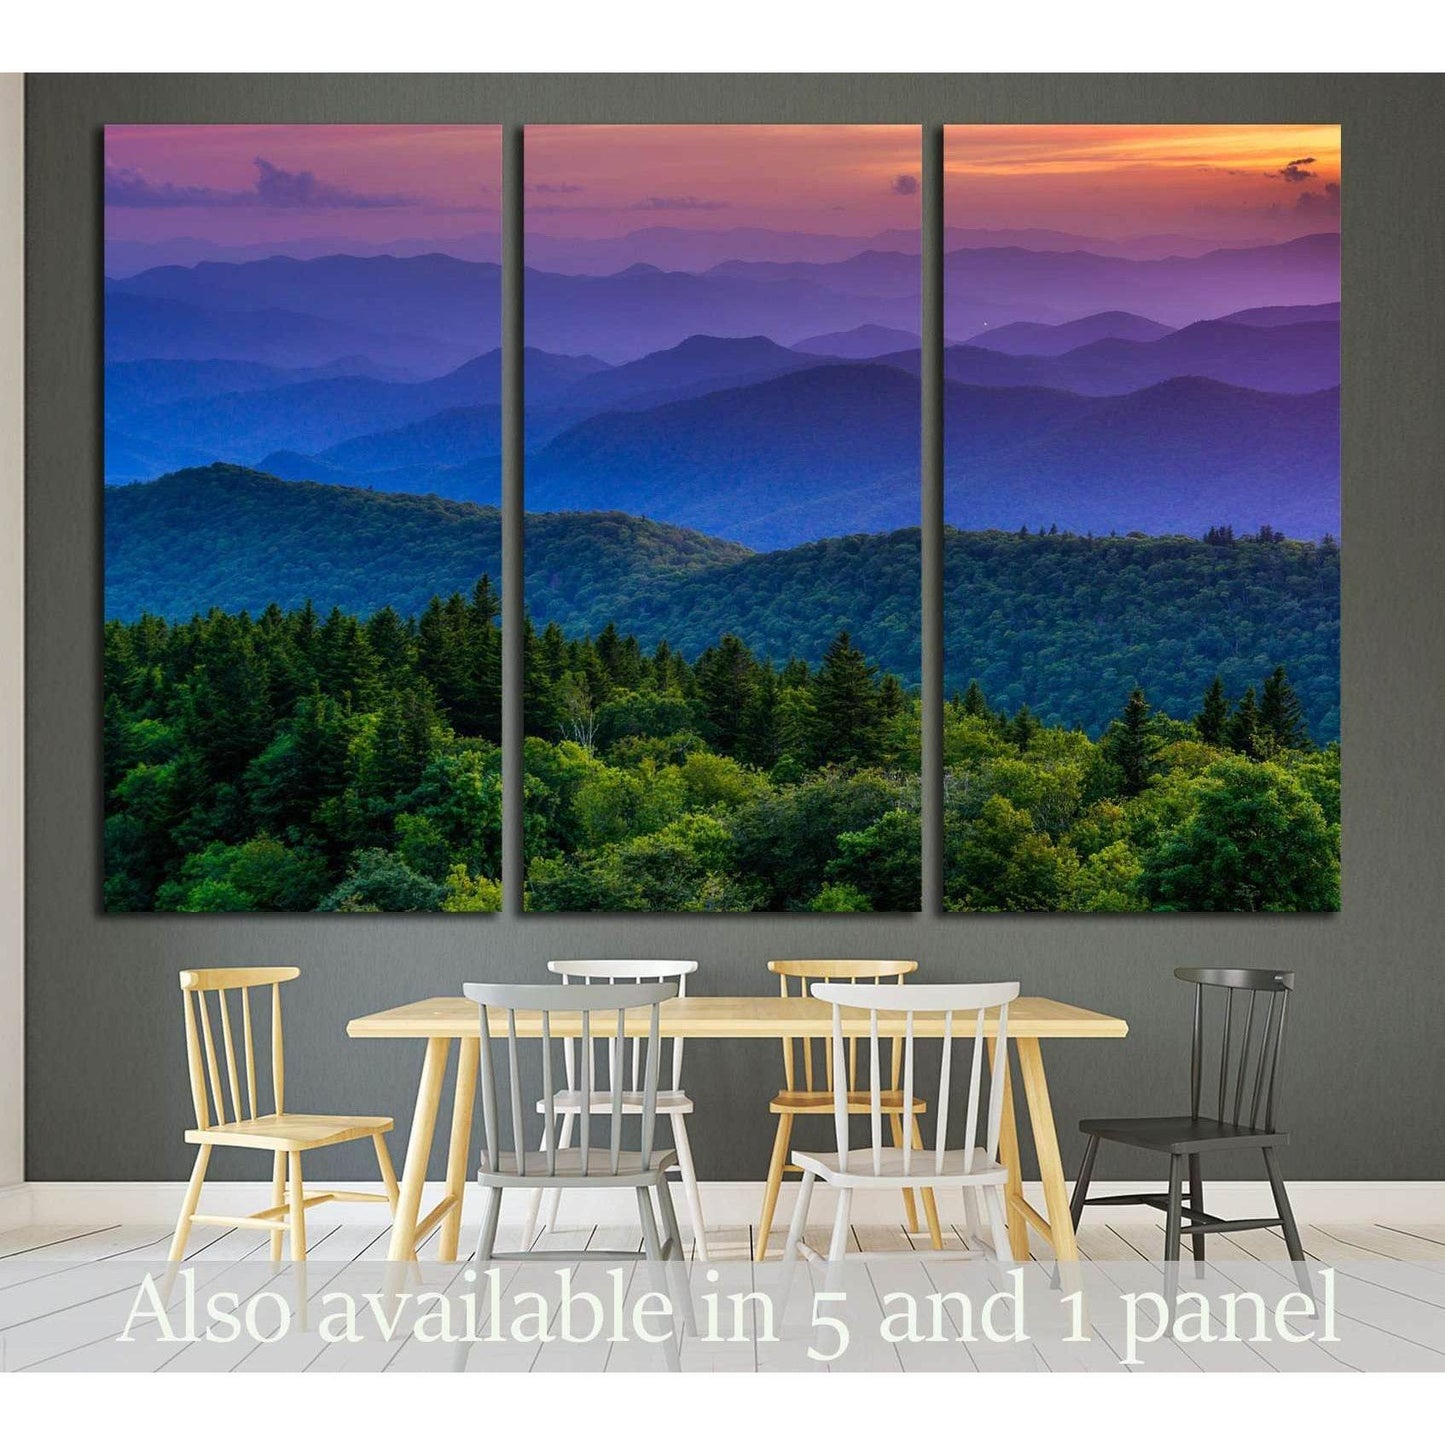 Sunset from Cowee Mountains Overlook, on the Blue Ridge Parkway in North Carolina №1970 Ready to Hang Canvas PrintThis canvas print elegantly captures a sunset over a rolling mountain landscape, presenting a harmonious blend of purple skies and verdant gr